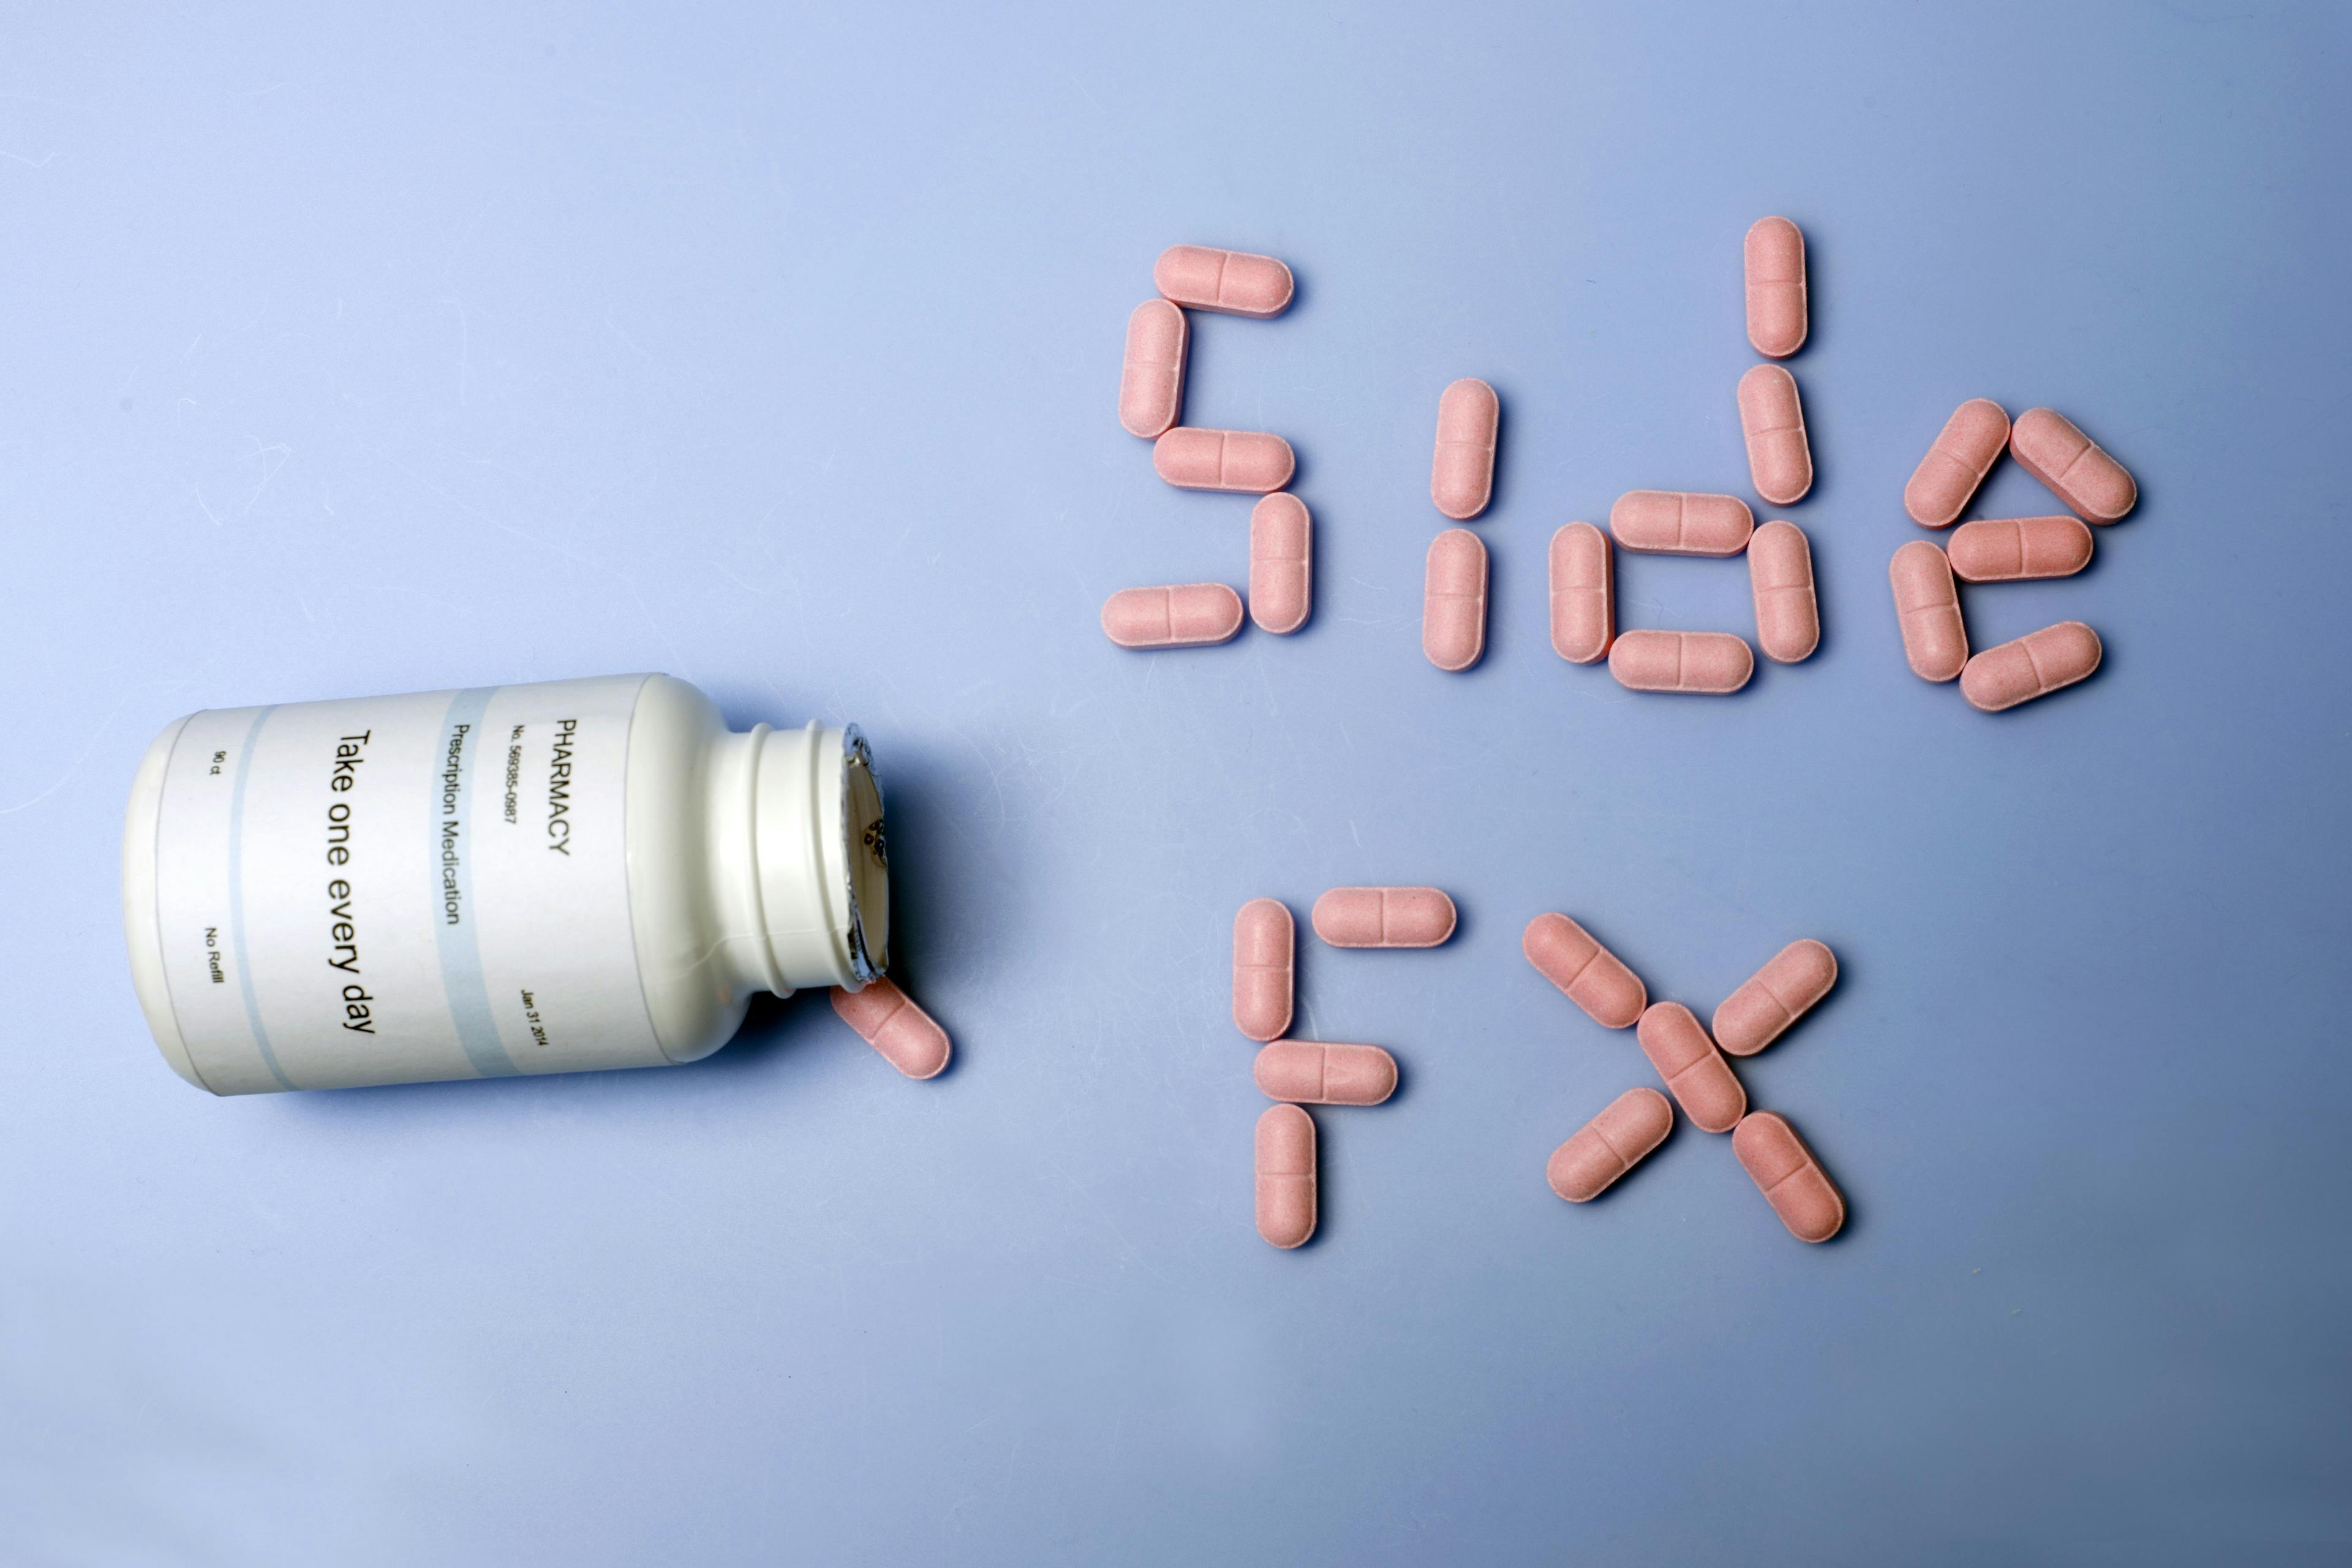 a bottle spilling out pills that say "side FX"